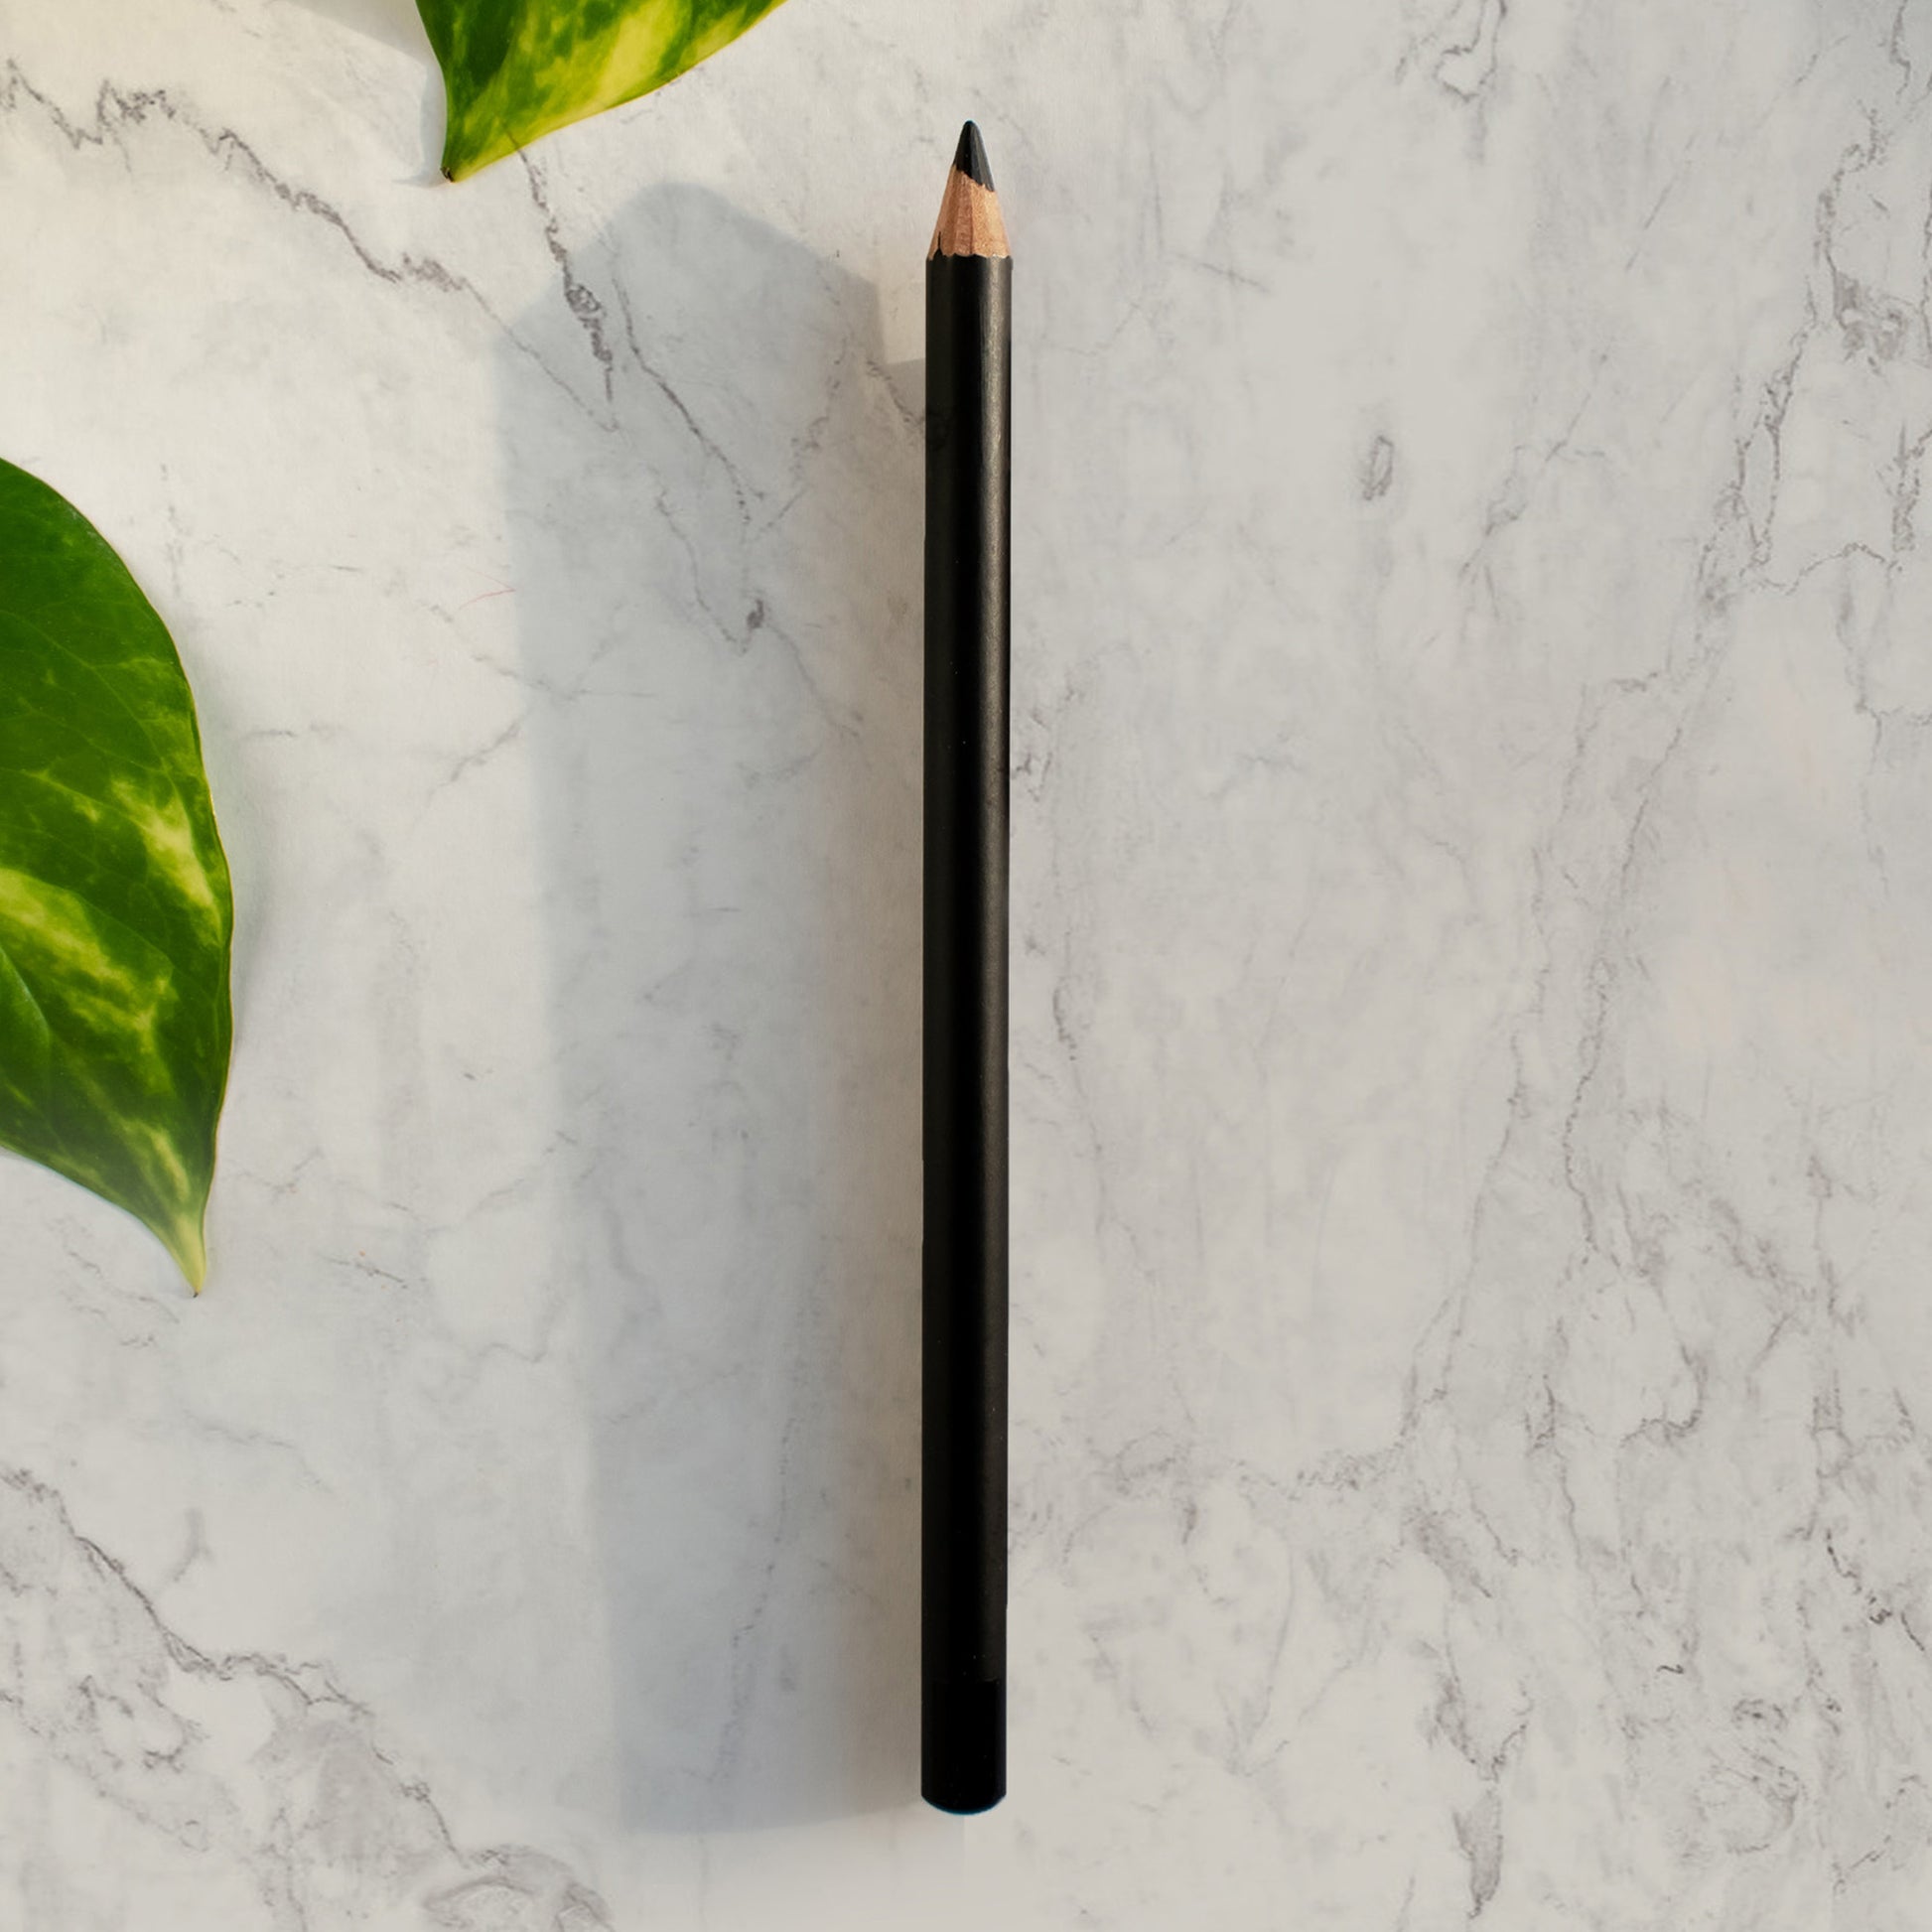 Introducing Cruisin Organics Berry Nude Liner Pencil - the perfect solution for effortlessly beautiful lips. With a natural or toning shade to complement your chosen lip color, this lip pencil outlines and enhances your lip shape for a flawless look. Try it now!